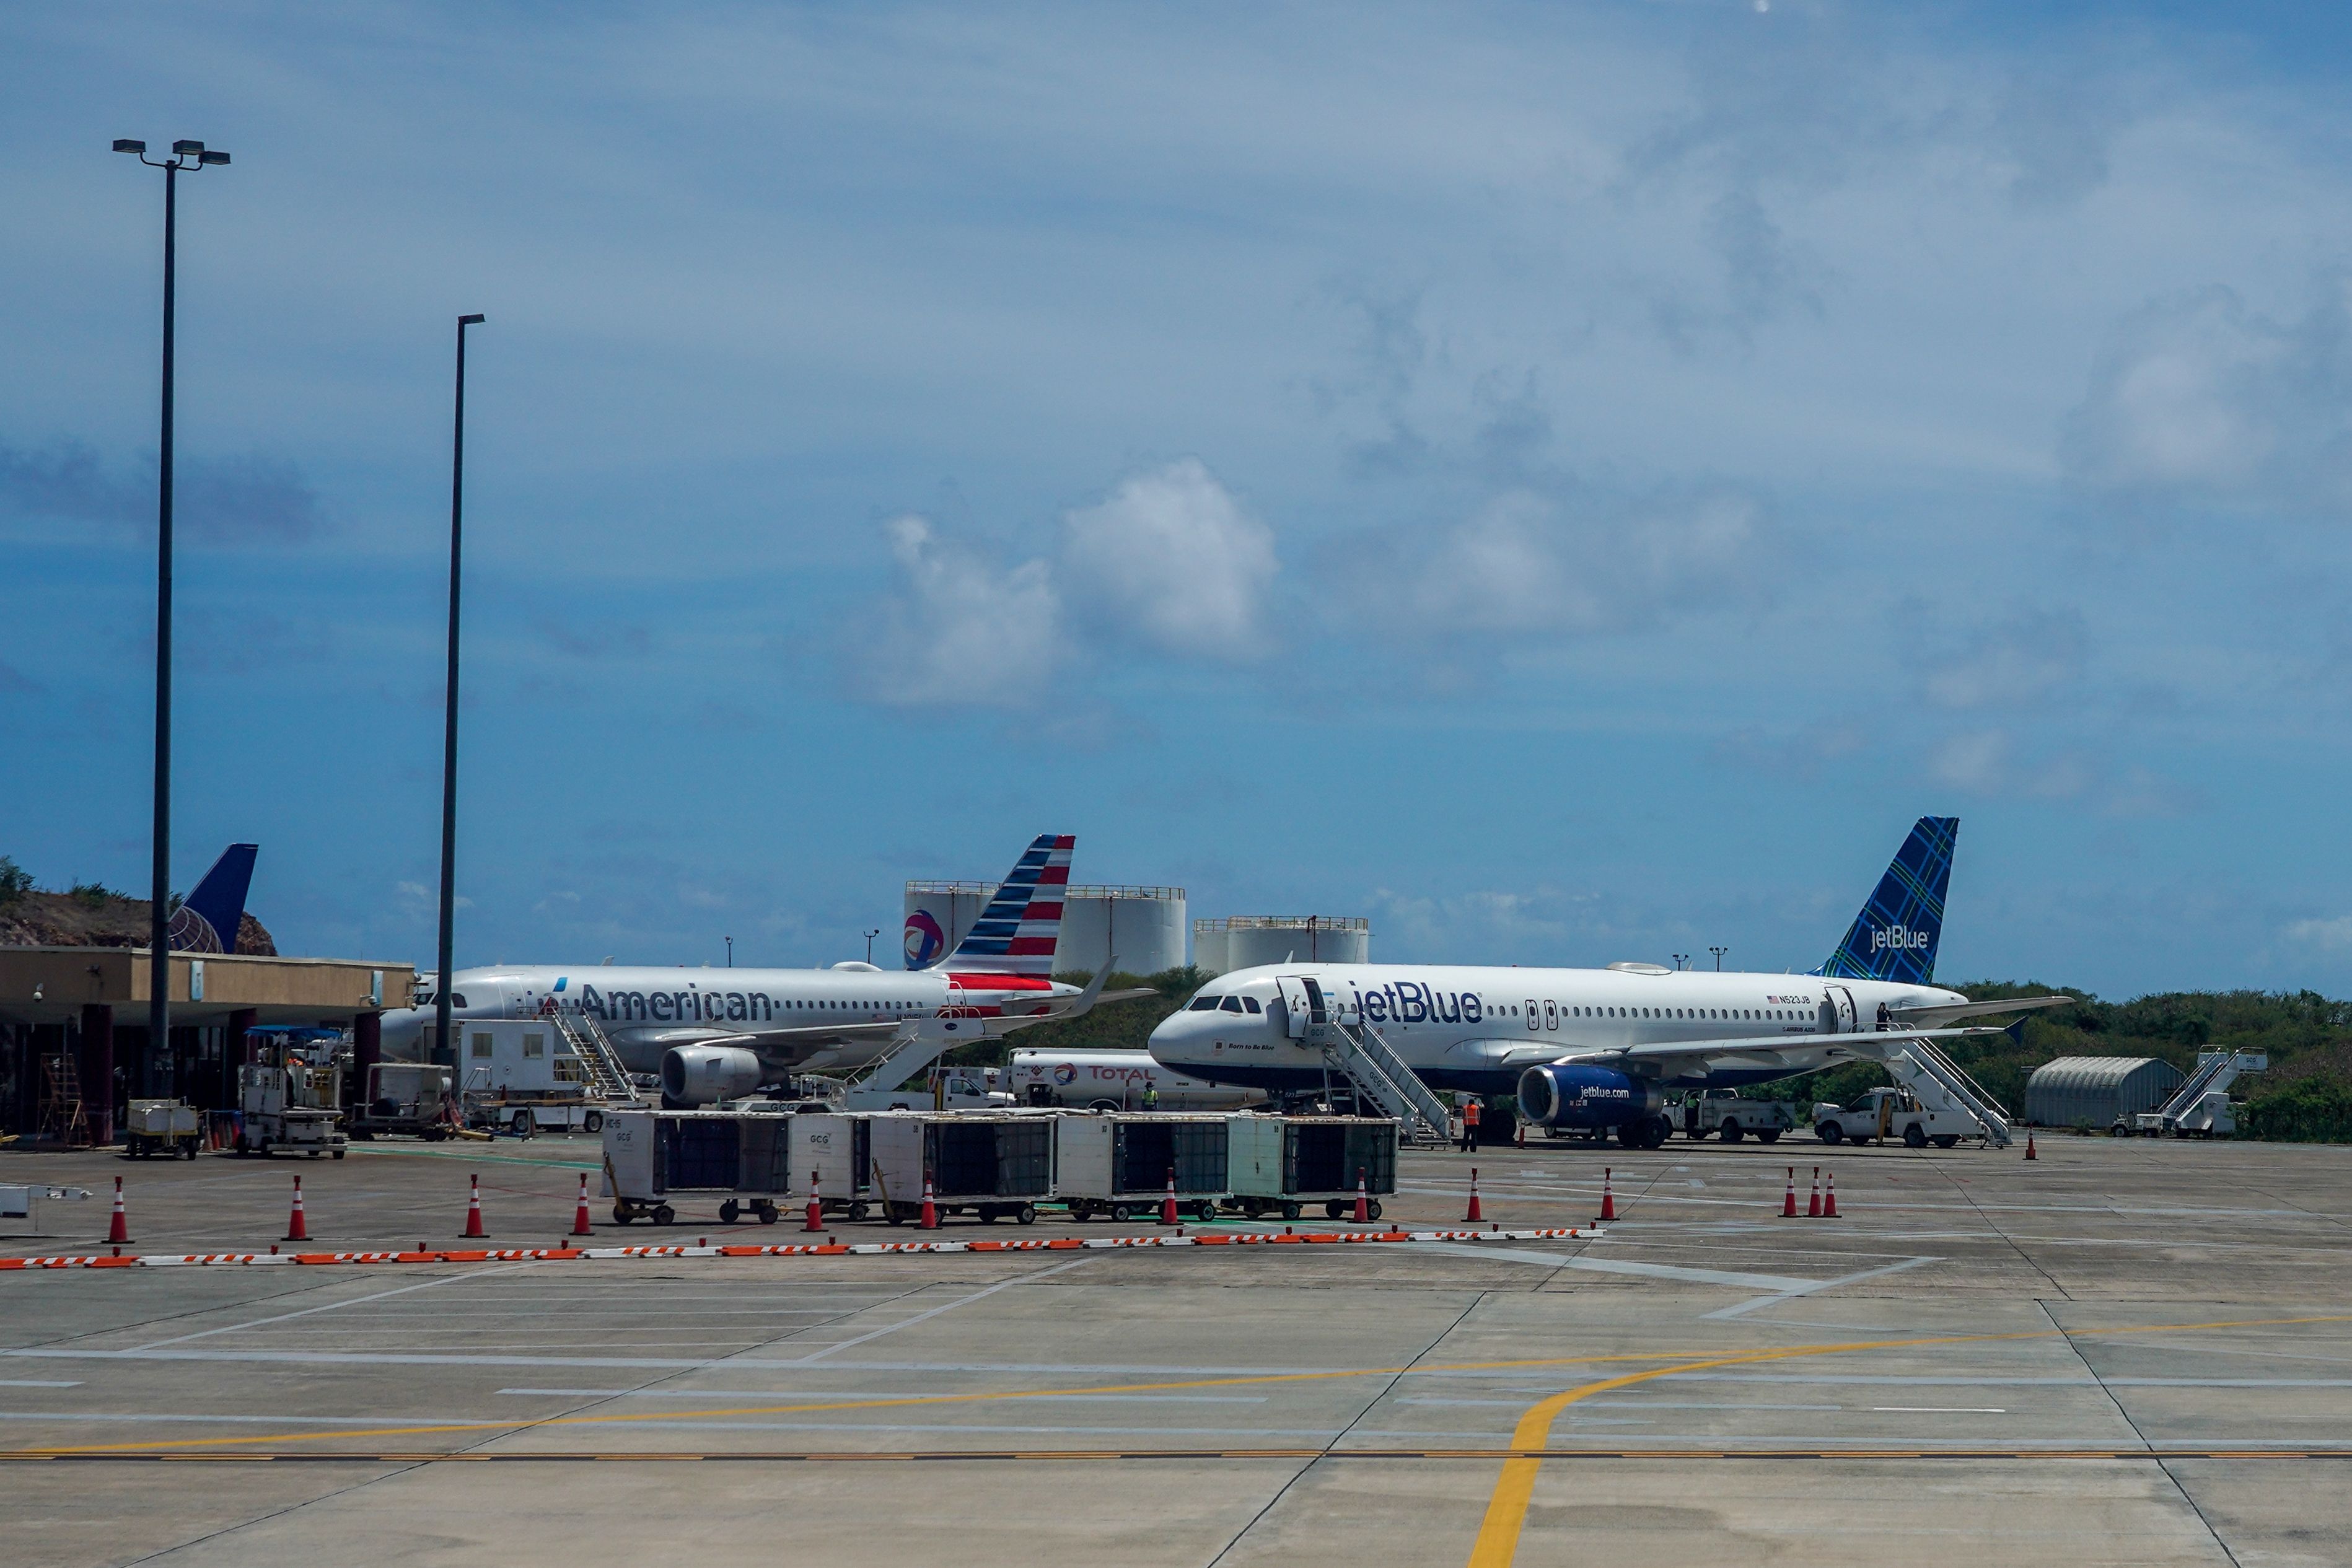 American Airlines and JetBlue aircraft on the apron at St. Thomas.